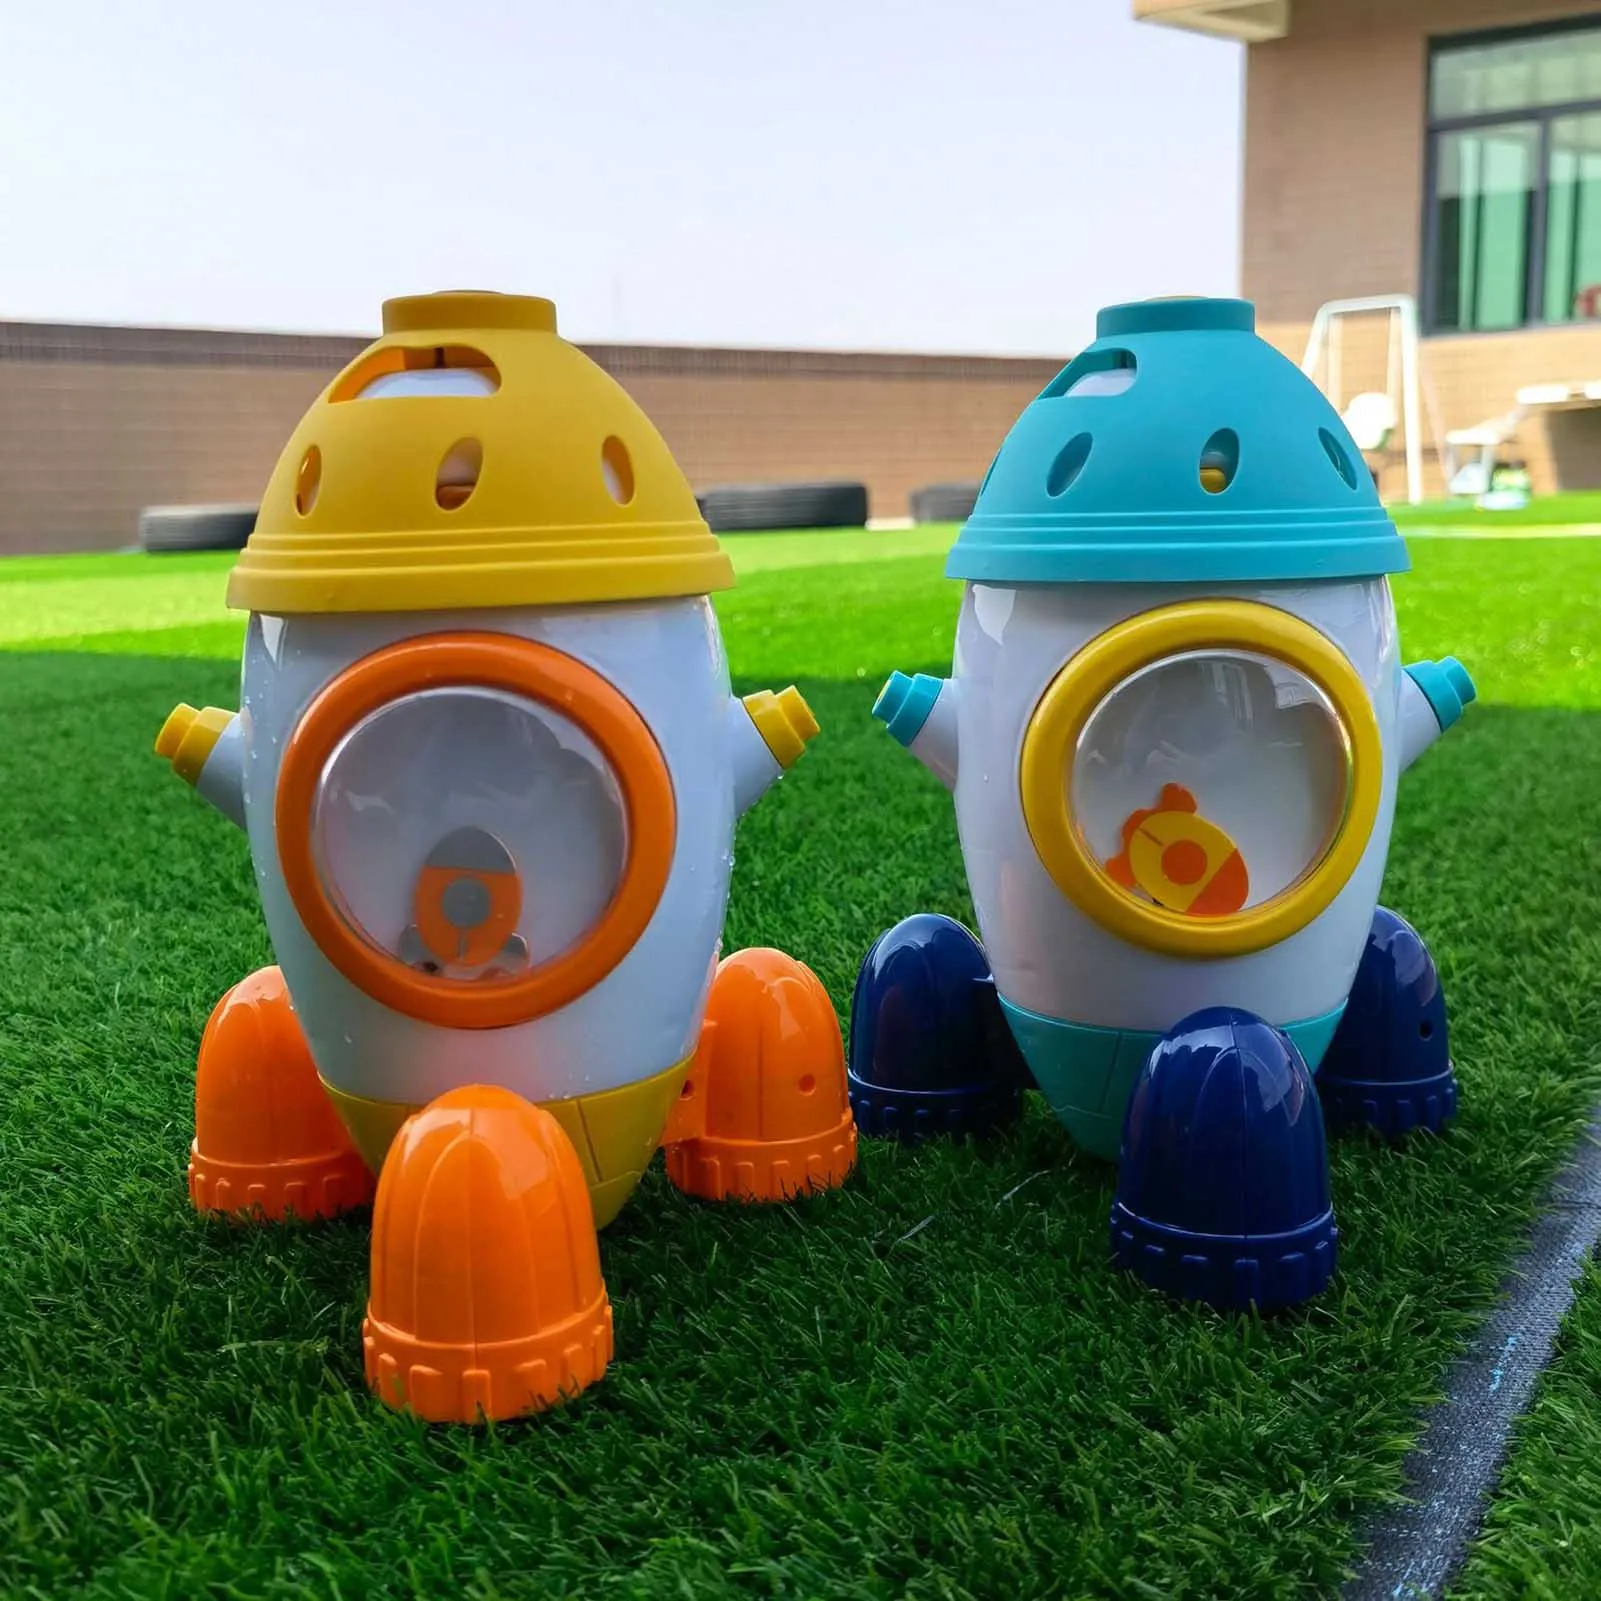 

Rocket Sprinkler For Kids Splash Toys For Yard For Toddlers Backyard Water Toys For Kids Fun Summer Outdoor Water Toys For Boys